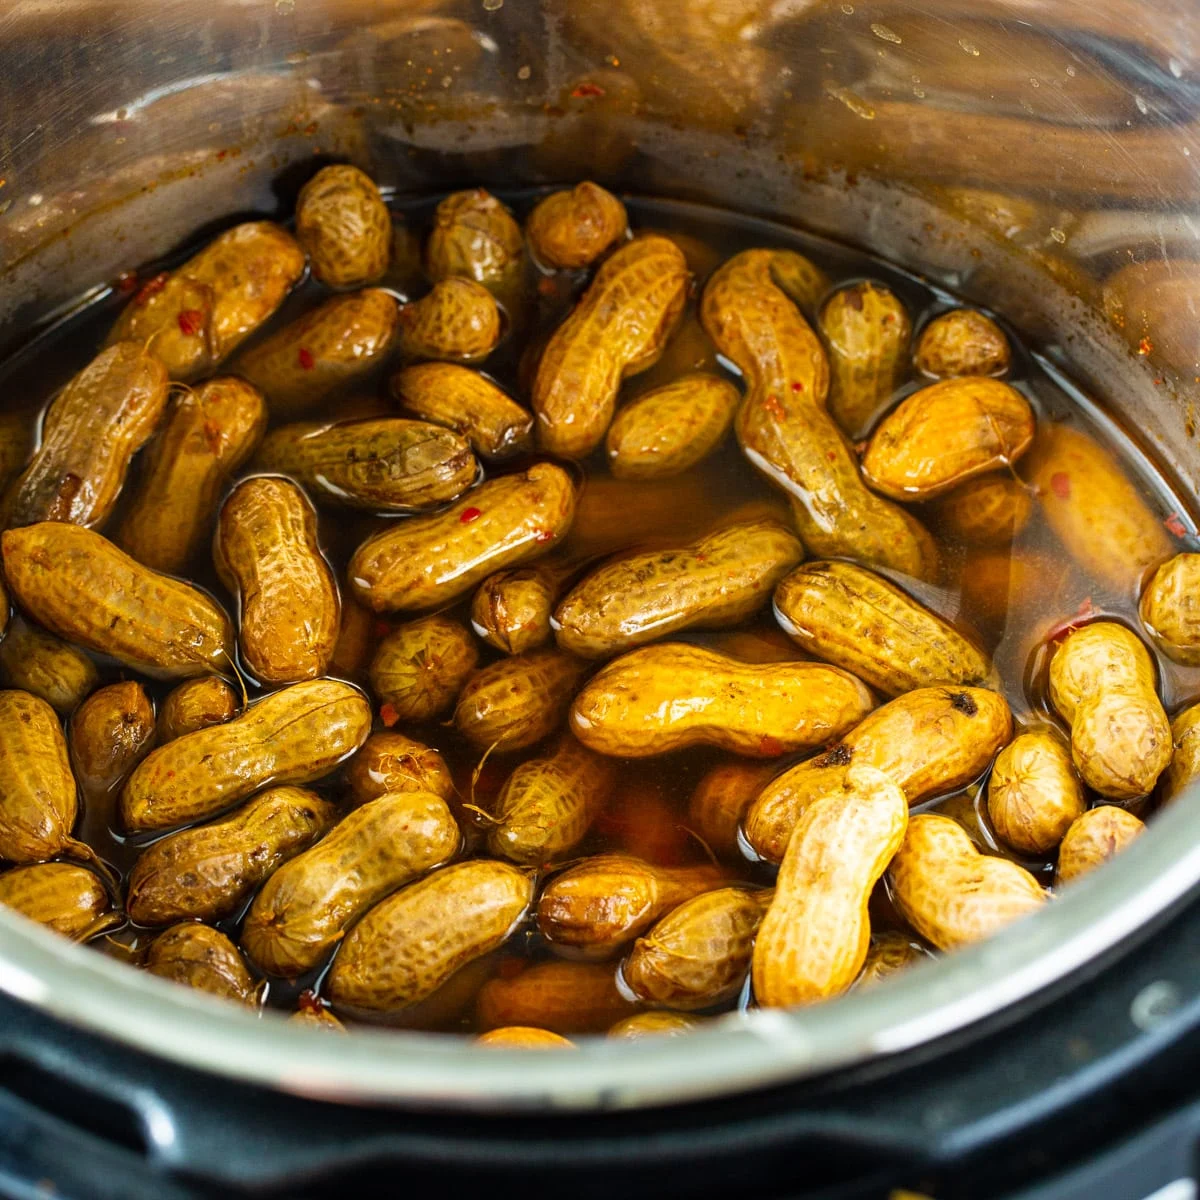 How To Cook Boiled Peanuts In An Electric Pressure Cooker